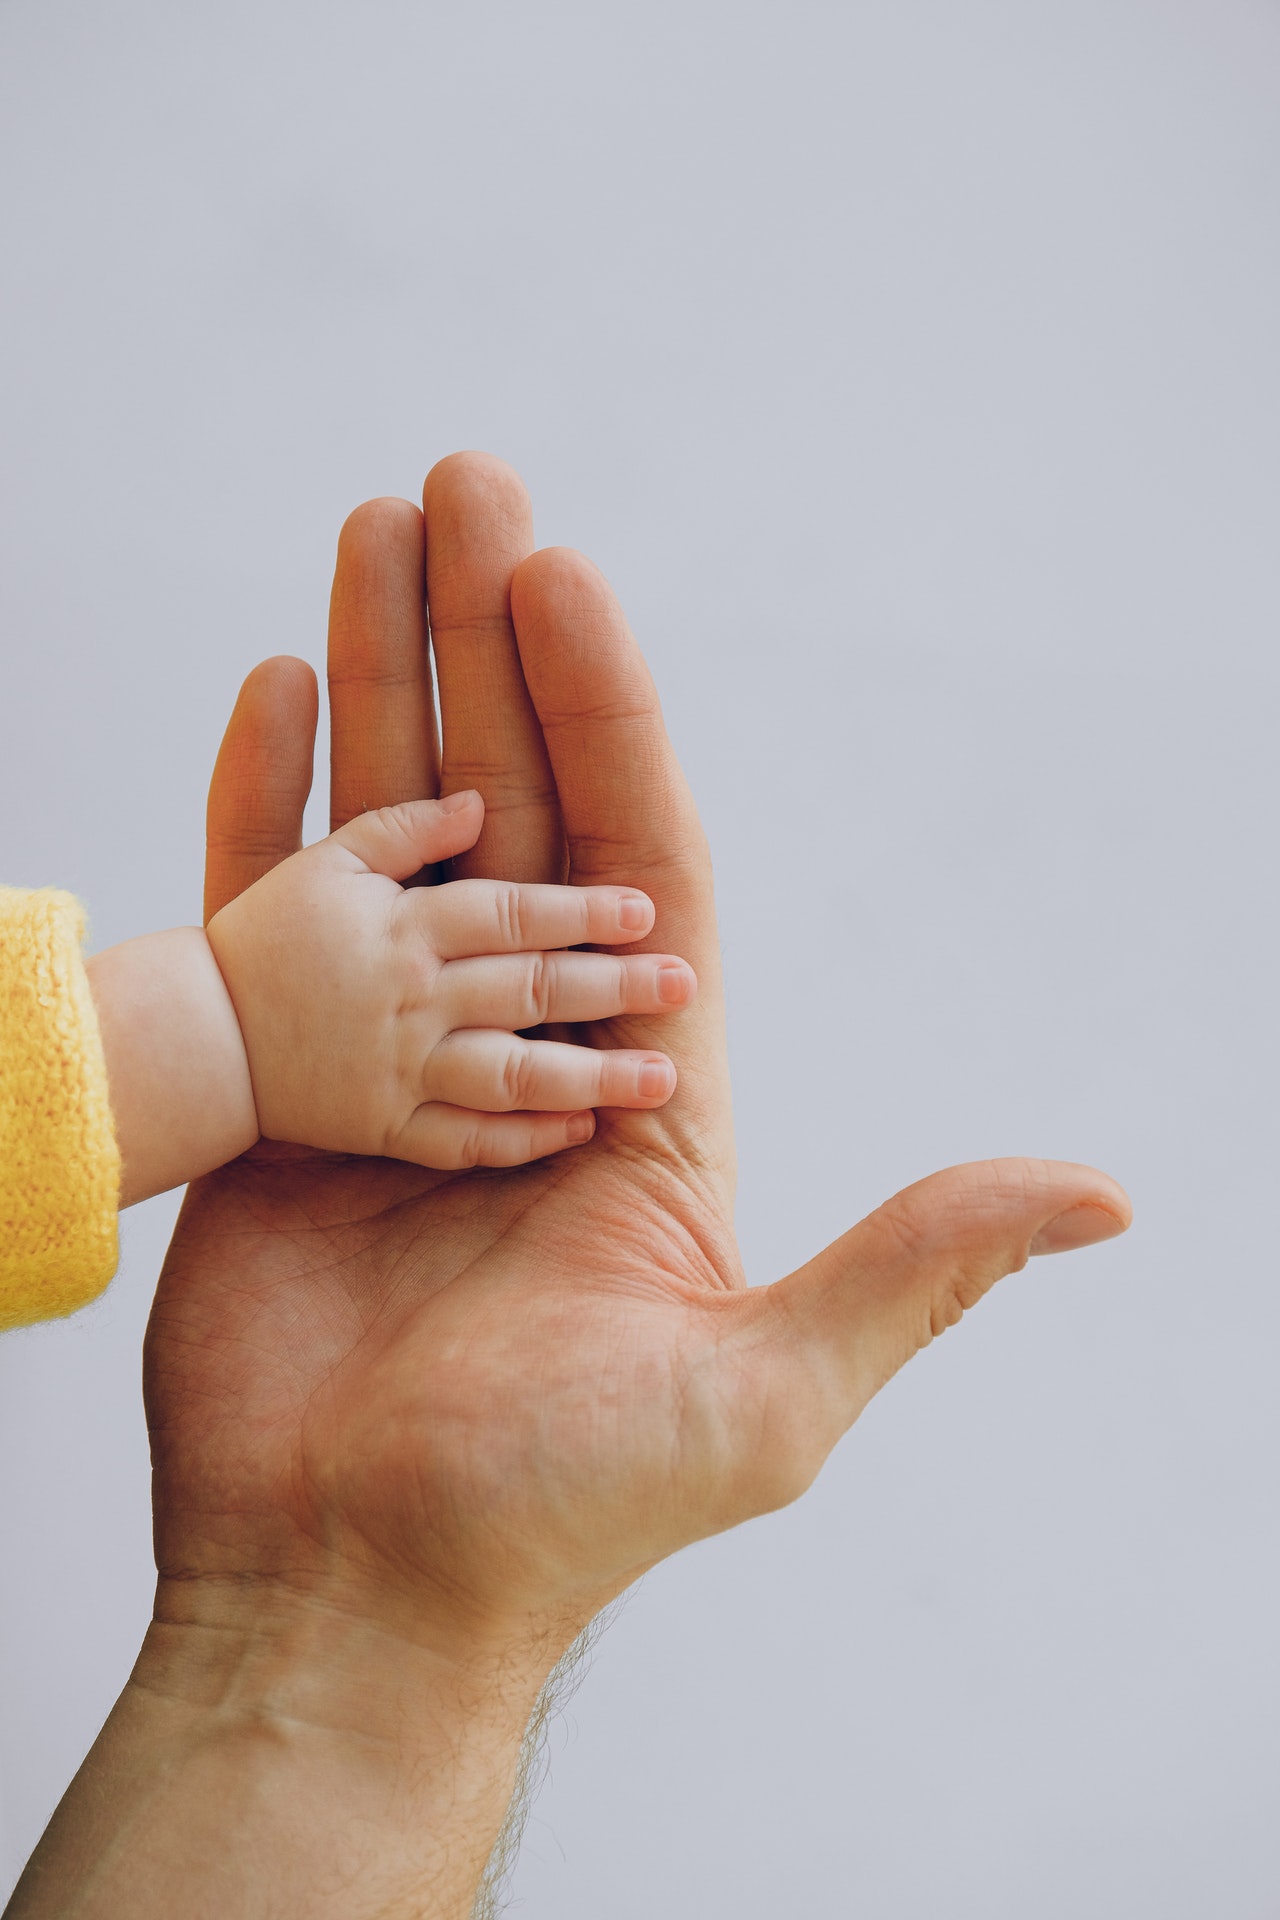 parent hand with baby hand